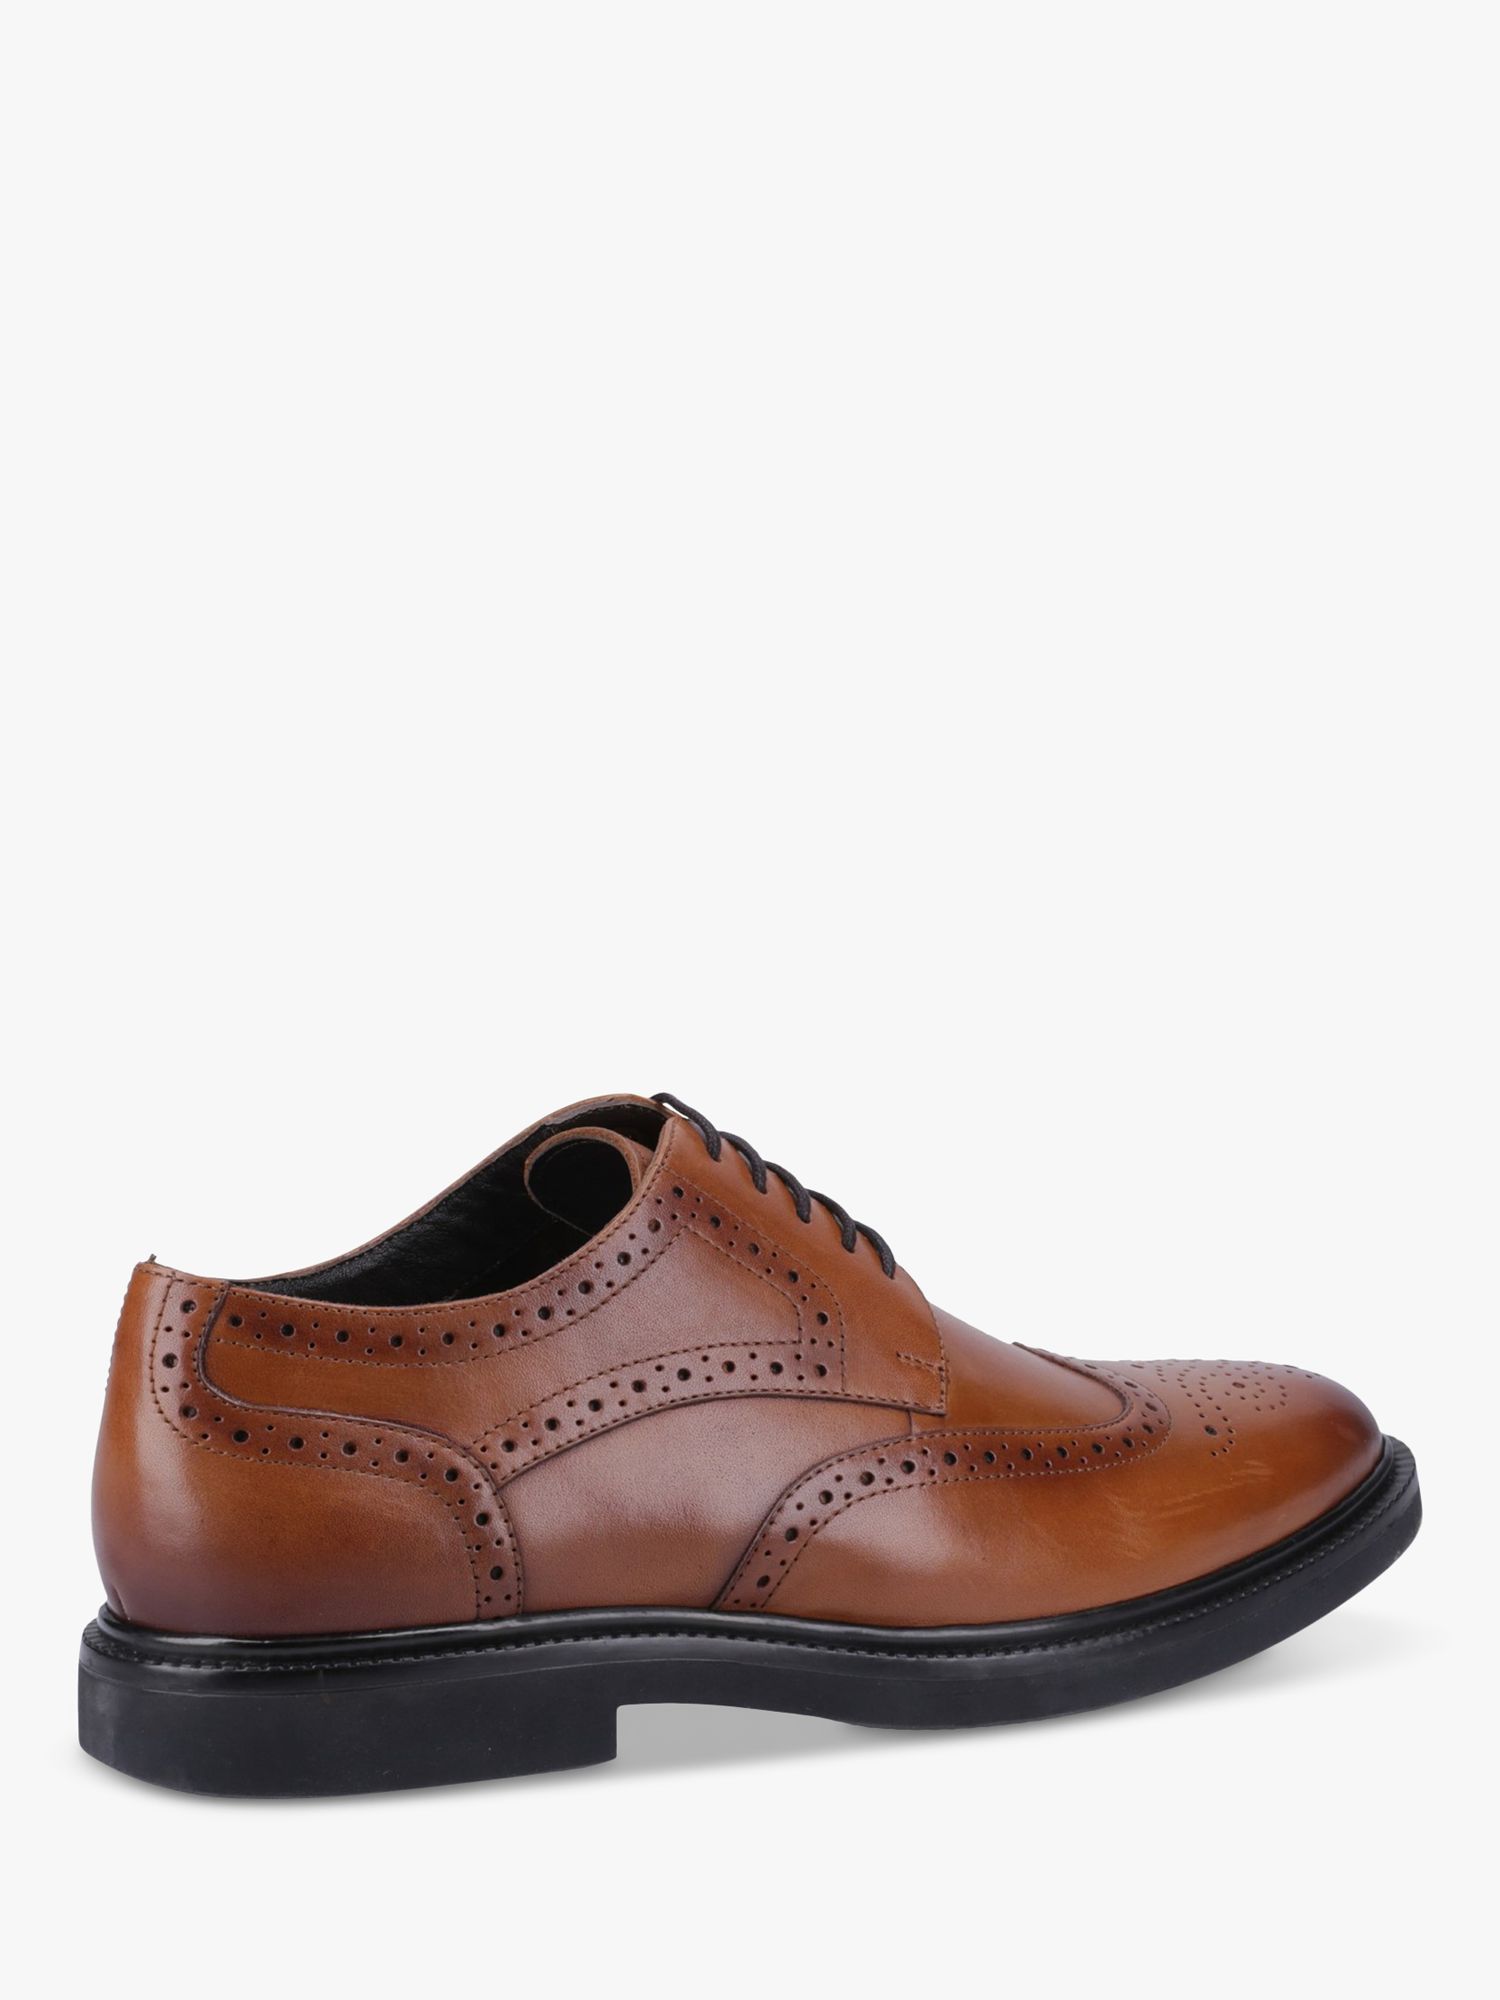 Buy Hush Puppies Kingston Brogue Leather Shoes, Tan Online at johnlewis.com